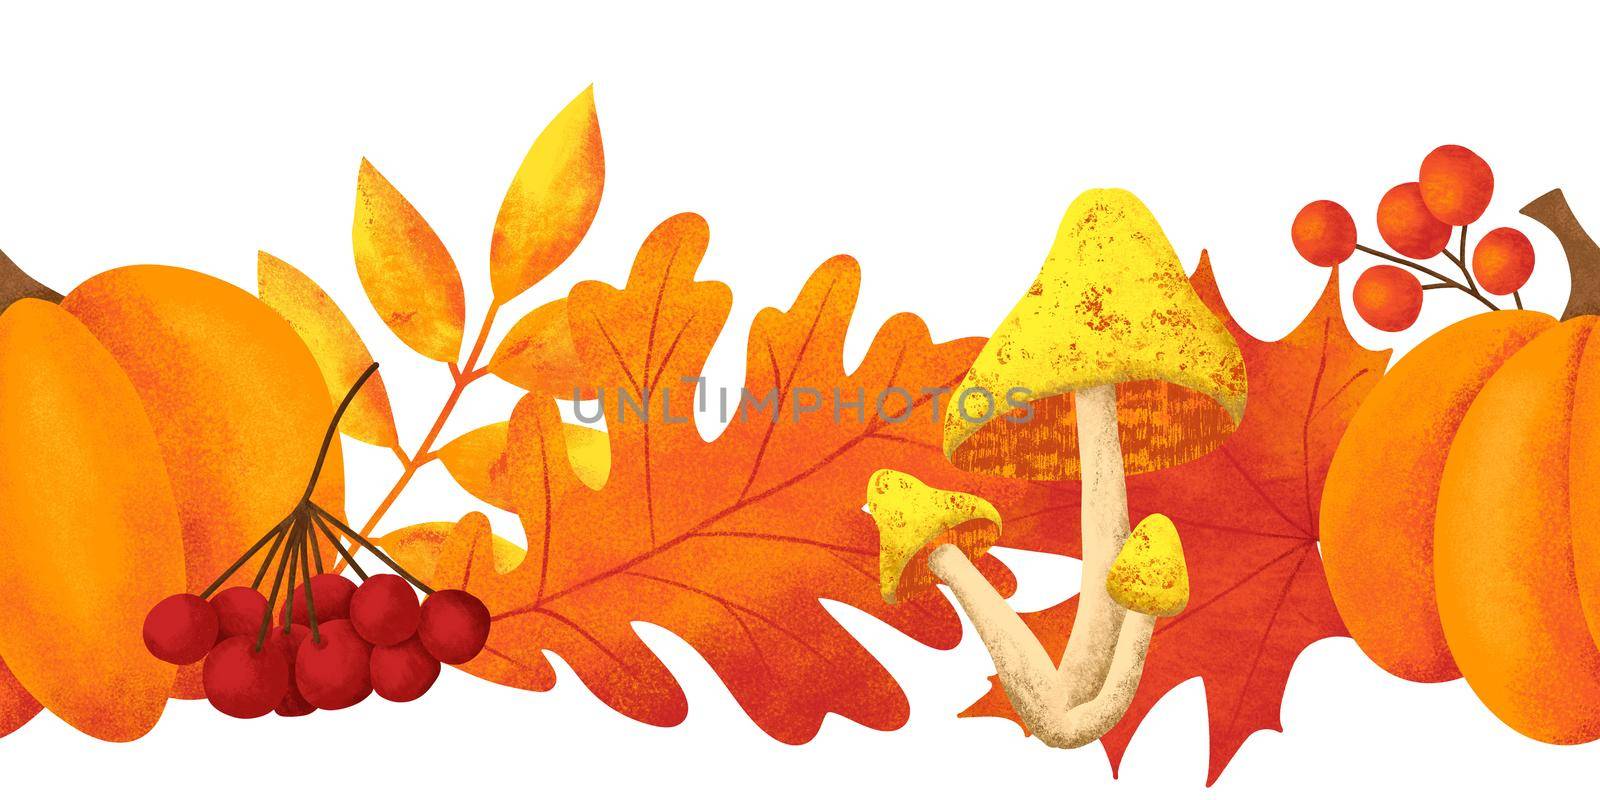 Hand drawn fall autumn seamless horizntal border with mushrooms forest wood grass leaves. Woodland frame in red orange yellow. Decorative ornament illustration